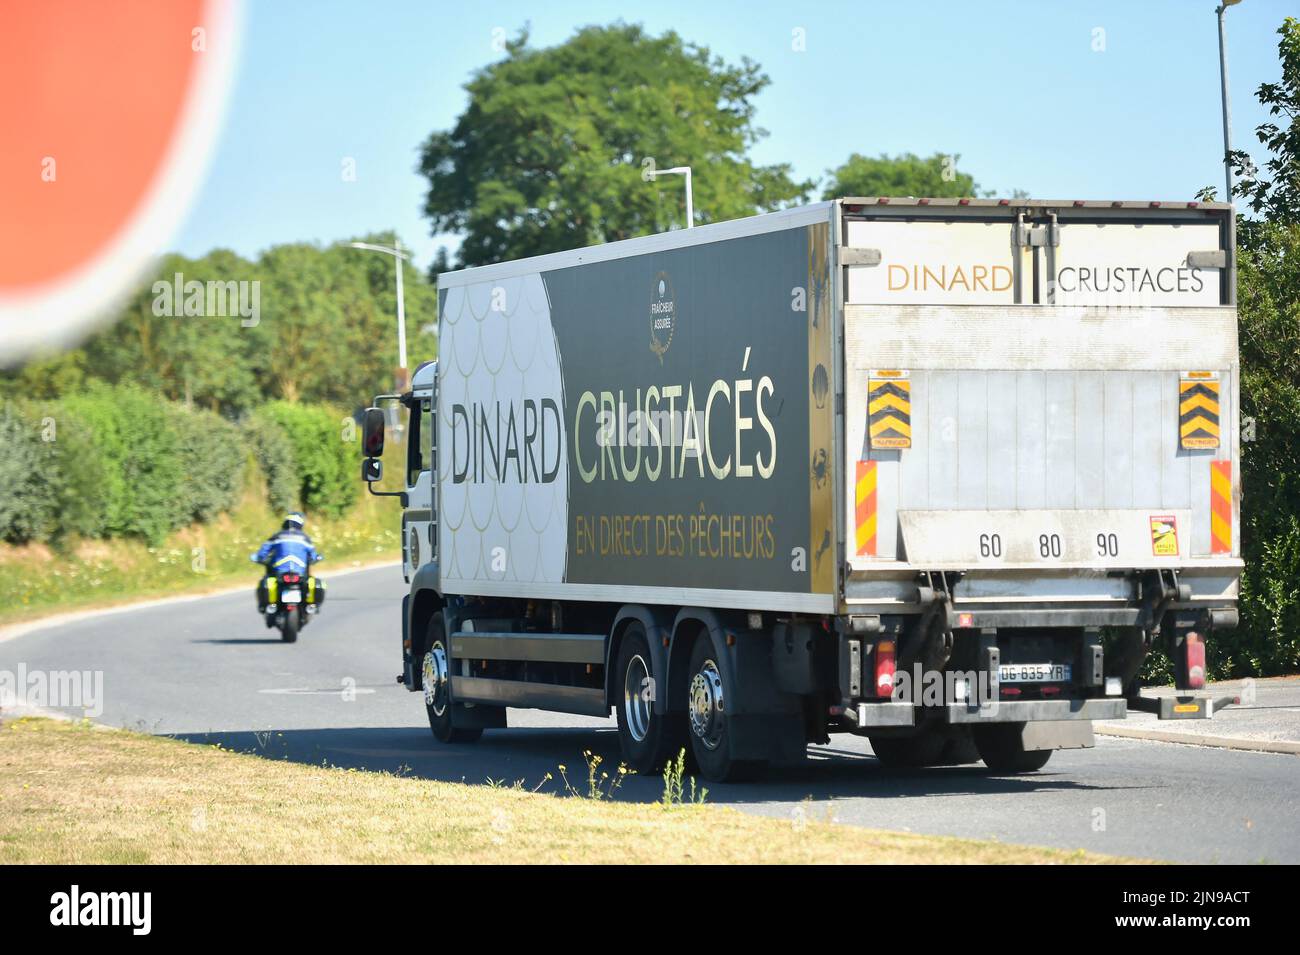 Ouistreham, France. 10th Aug, 2022. The truck carrying the beluga whale which was extracted from a lock in the Eure region the night before, arrives in Ouistreham, Calvados, France on August 10, 2022. A beluga whale that strayed into the River Seine and began swimming in the direction of Paris has died during an ambitious rescue effort intended to help it back to its traditional cold Arctic waters. The four-metre animal was euthanised by vets after it developed breathing difficulties while being transferred by road to the Normandy coast. Credit: Abaca Press/Alamy Live News Stock Photo